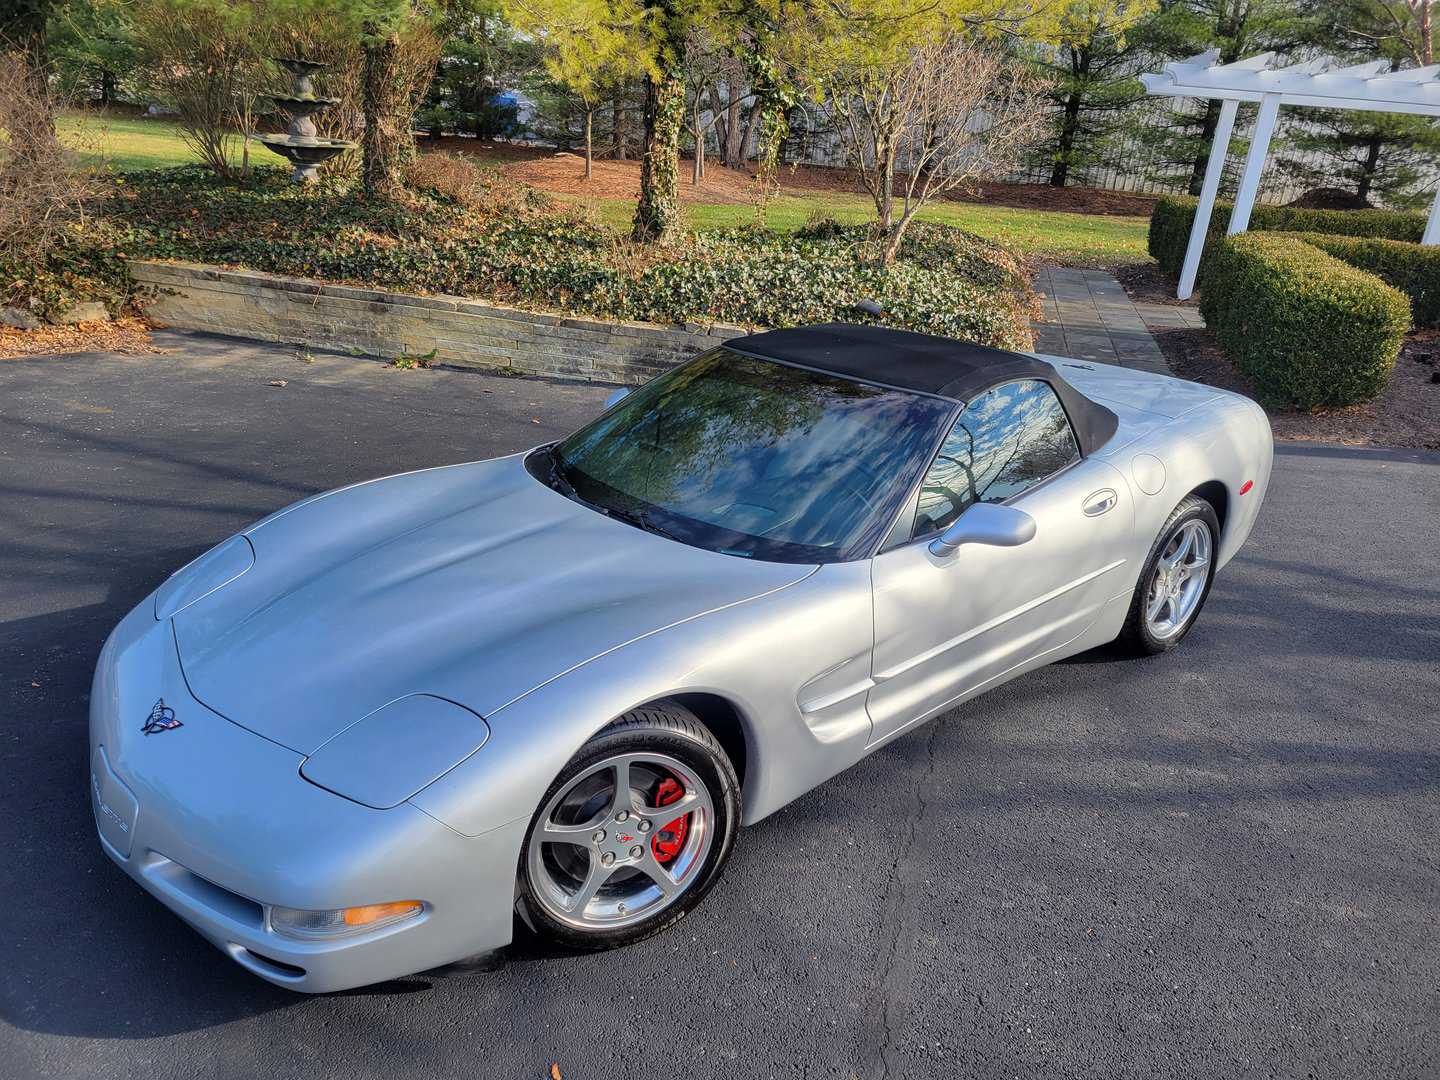 A Silver 2001 Chevrolet Corvette Parked In A Driveway.